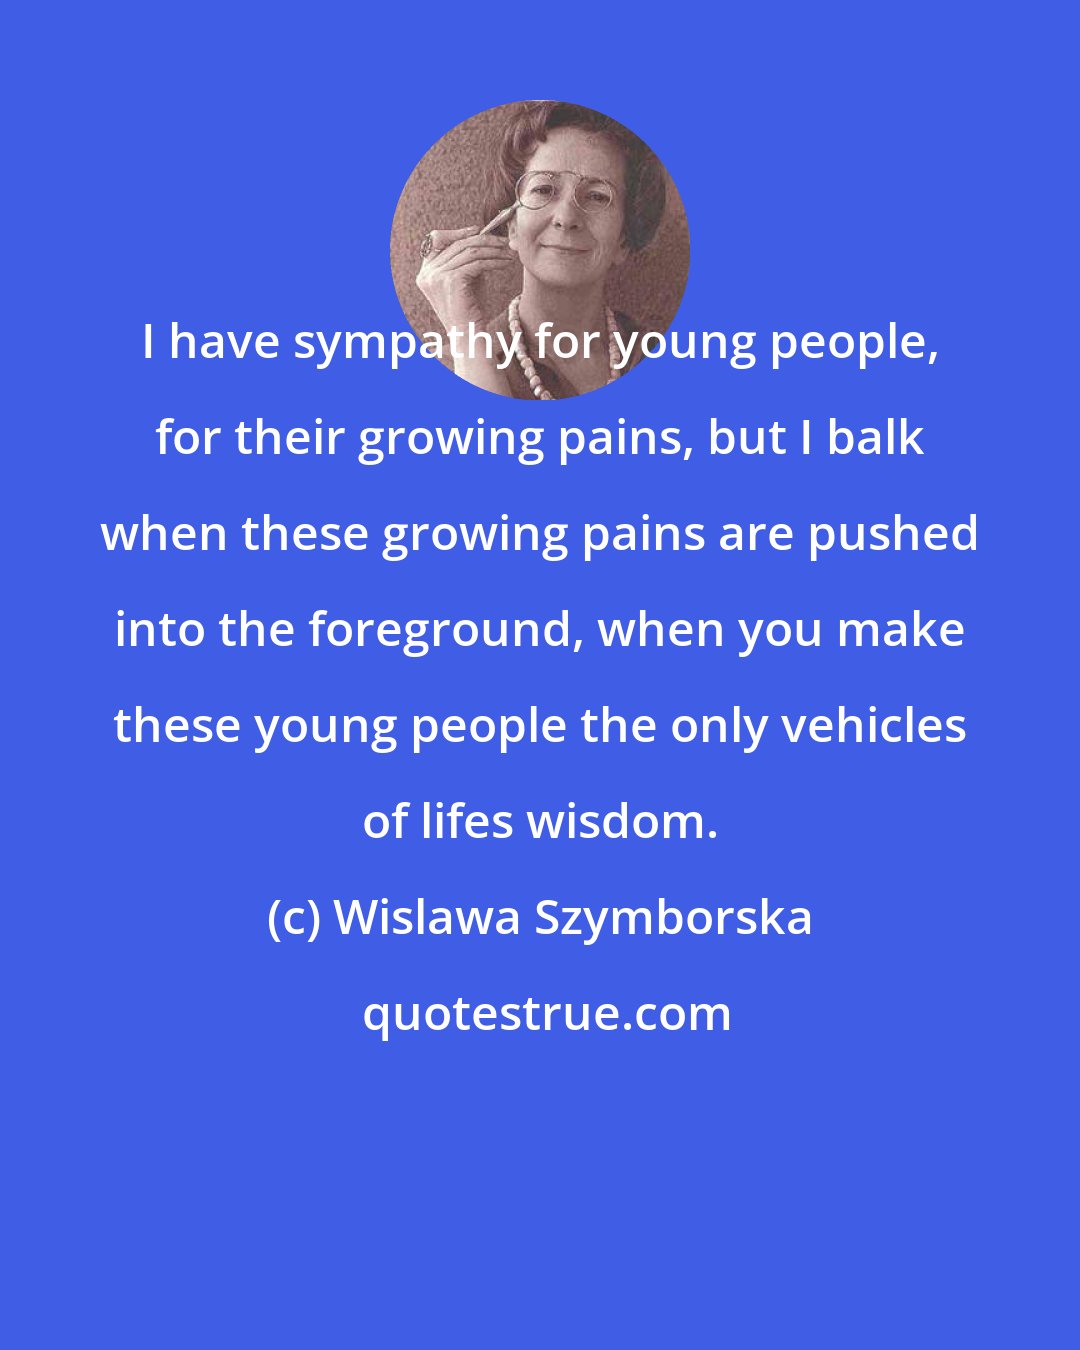 Wislawa Szymborska: I have sympathy for young people, for their growing pains, but I balk when these growing pains are pushed into the foreground, when you make these young people the only vehicles of lifes wisdom.